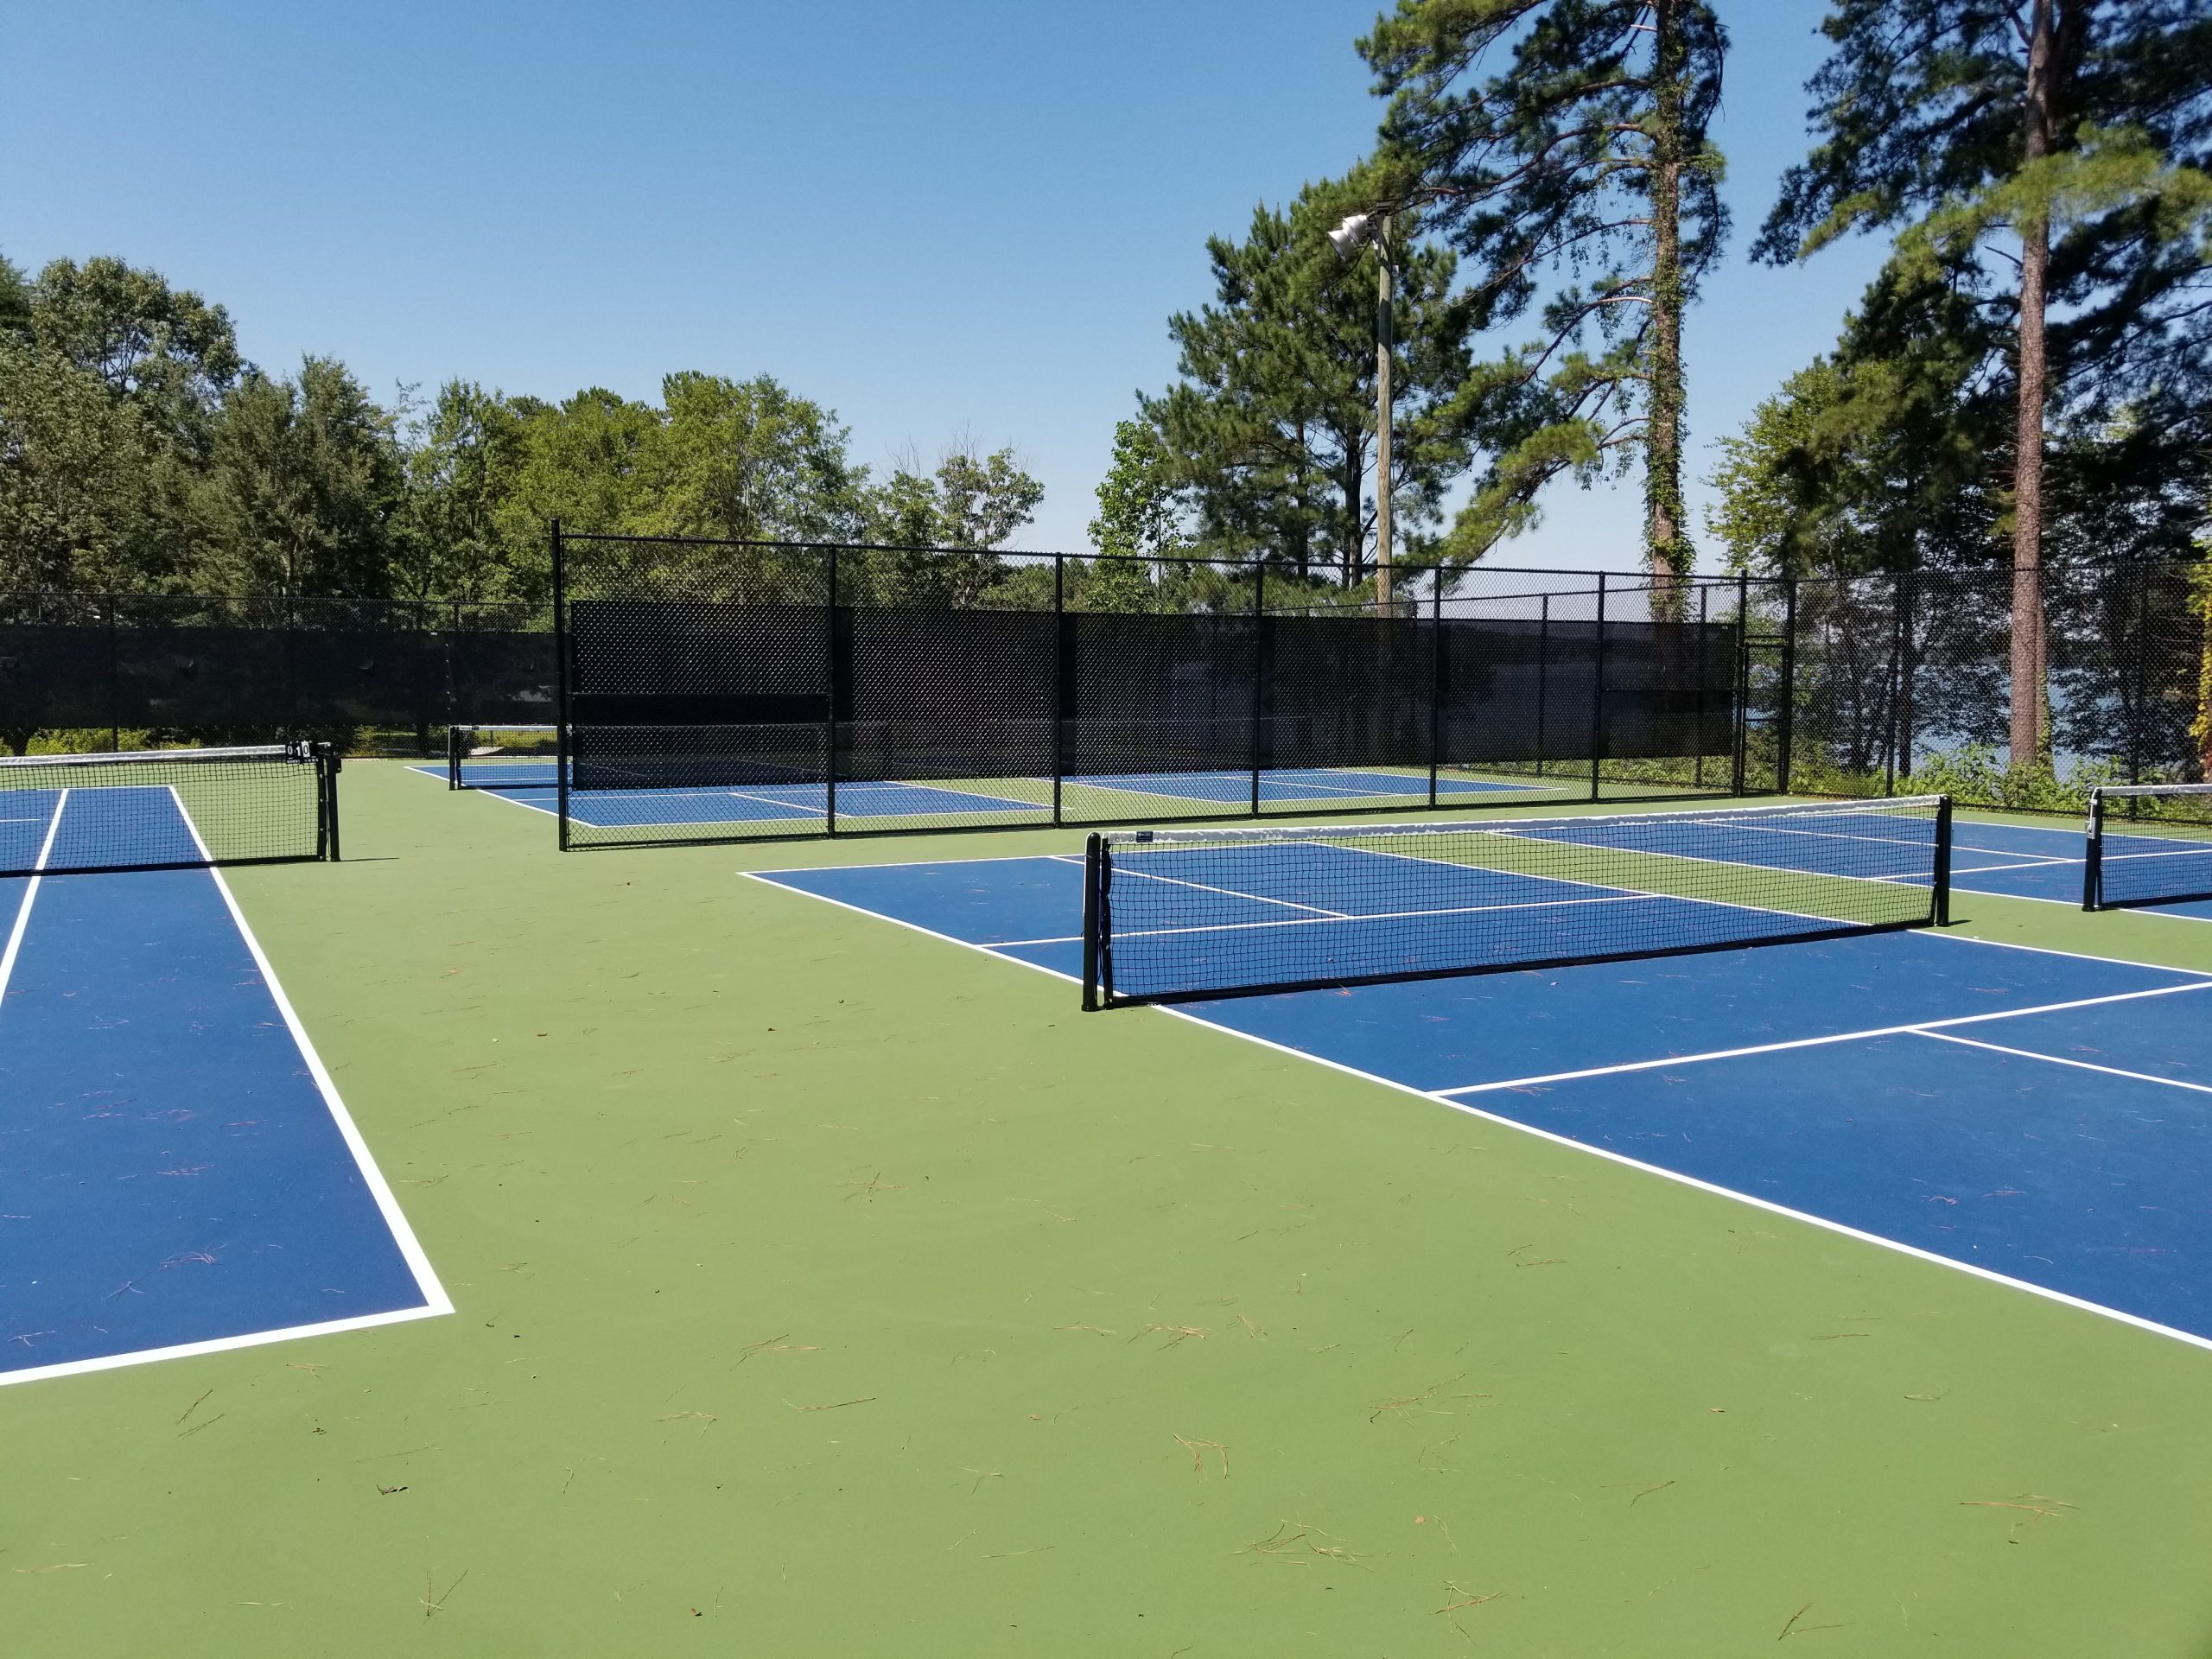 Convert Existing Hard Courts To Permanent Pickleball Courts